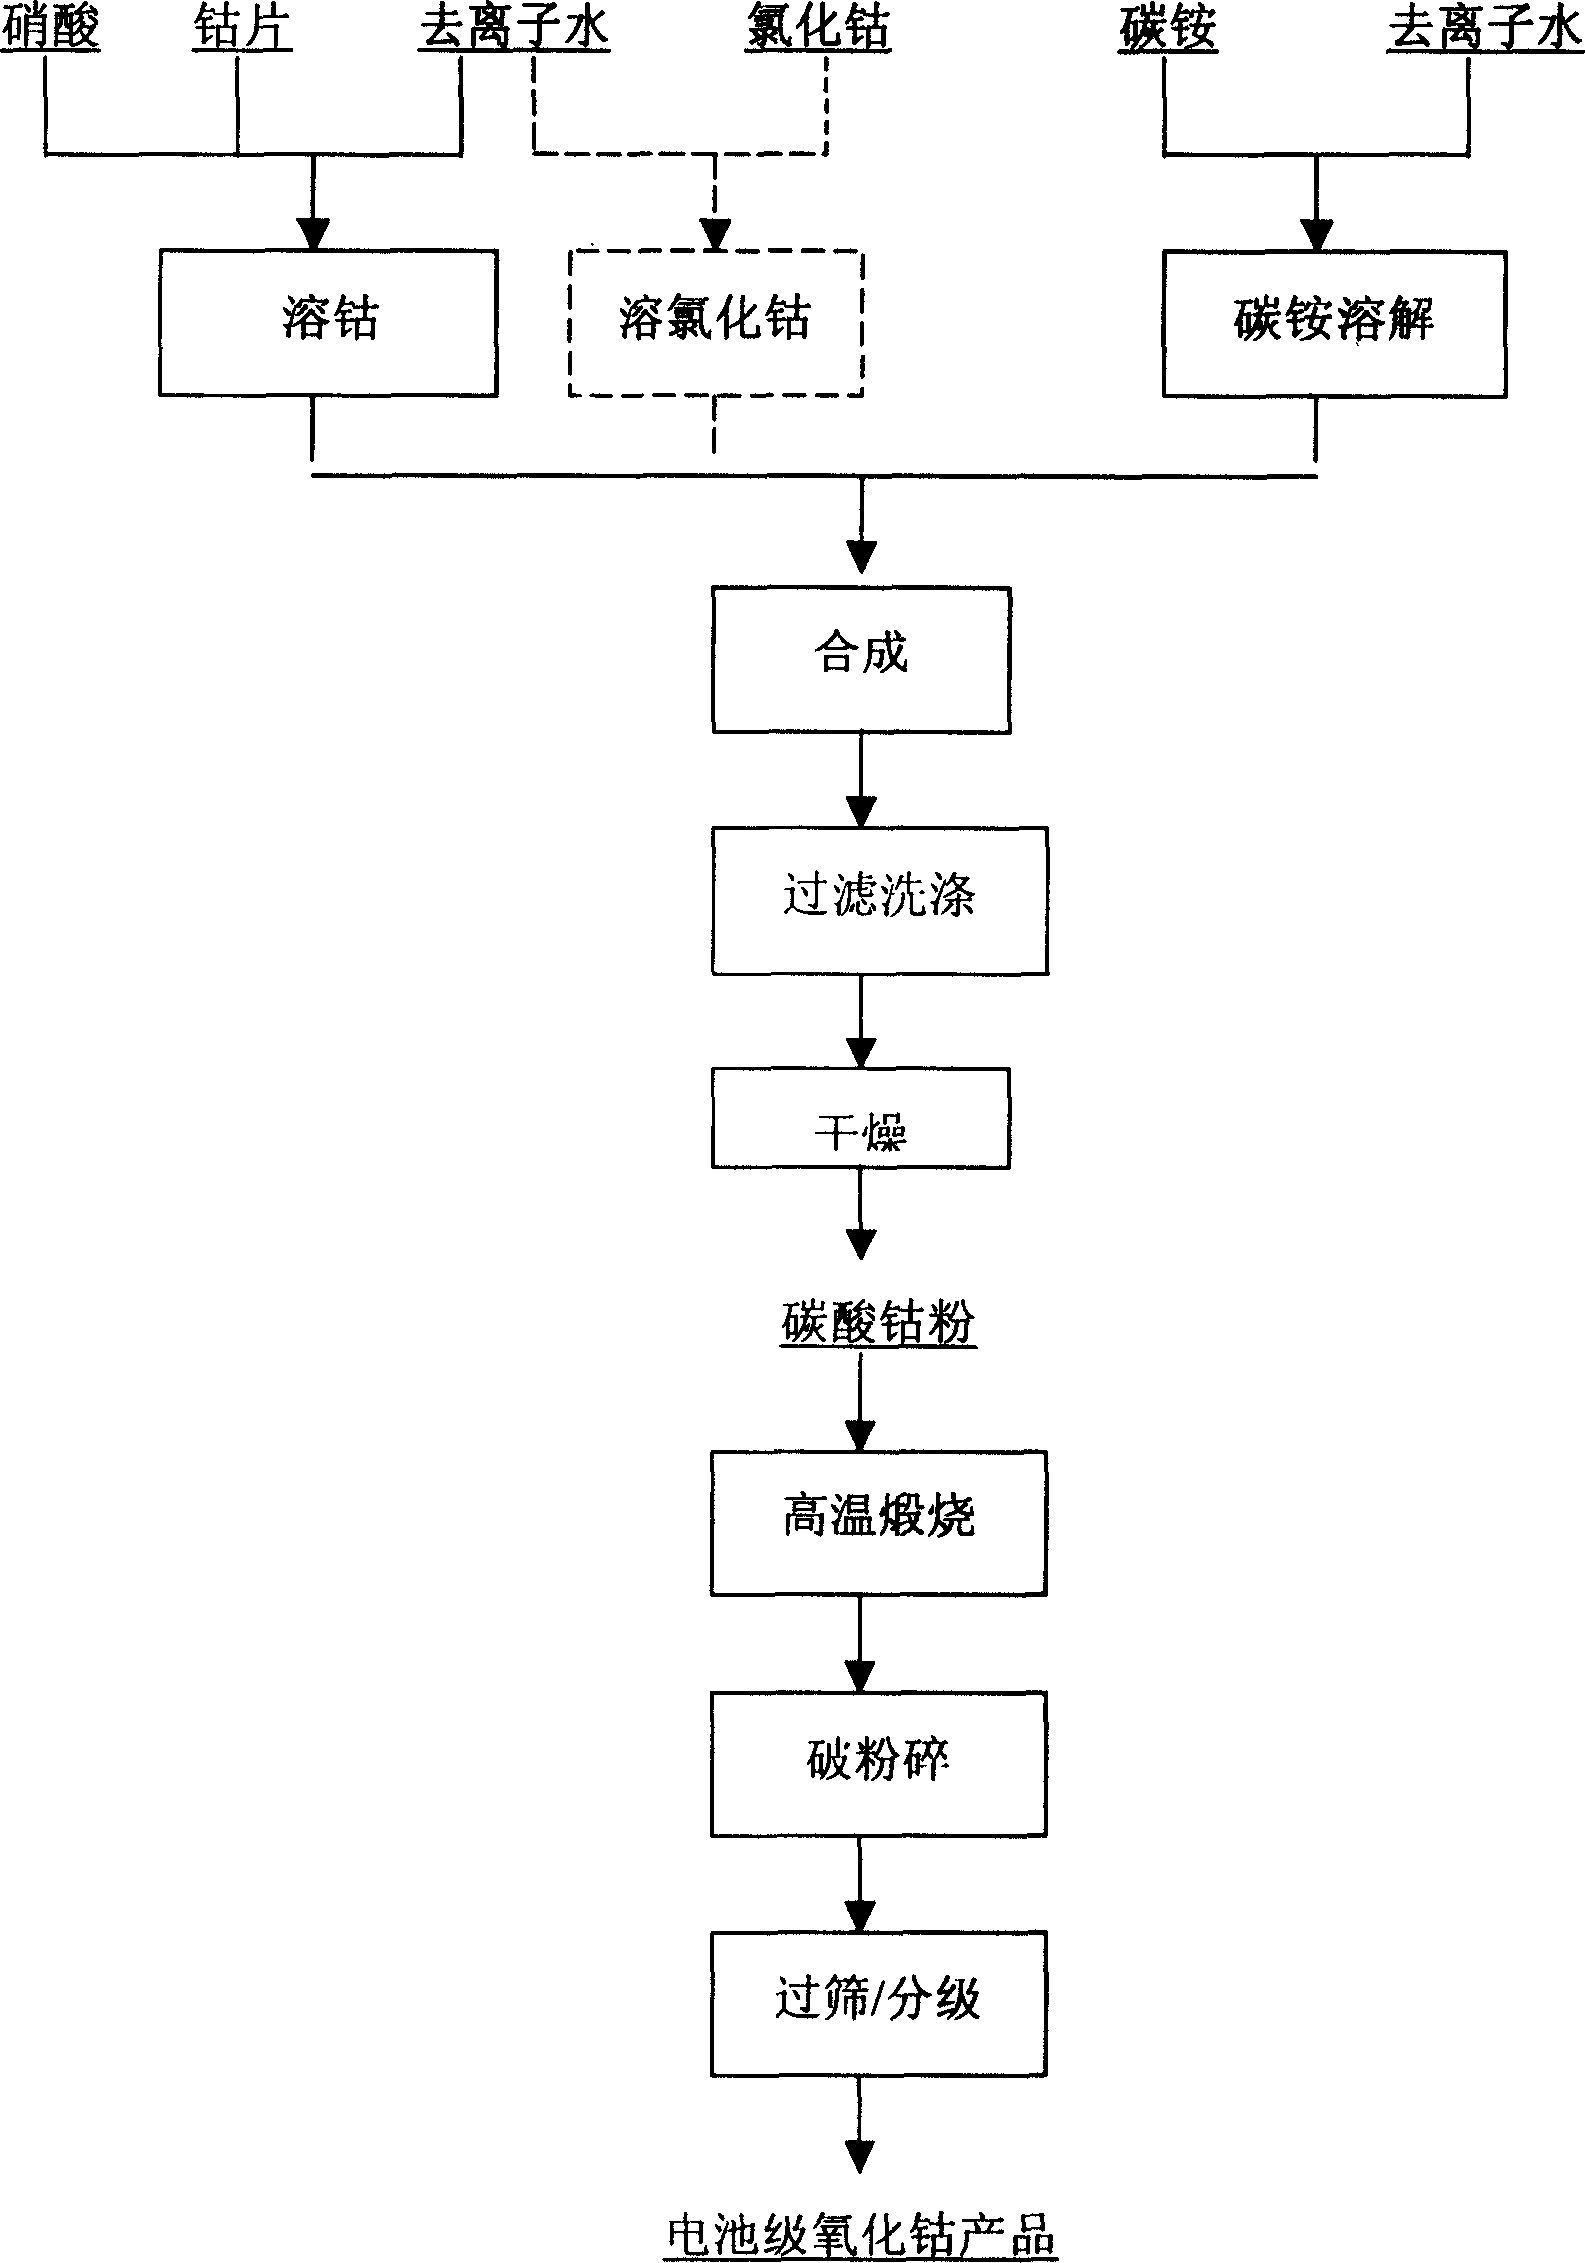 Cobalt oxide of lithium battery grade and its preparation method